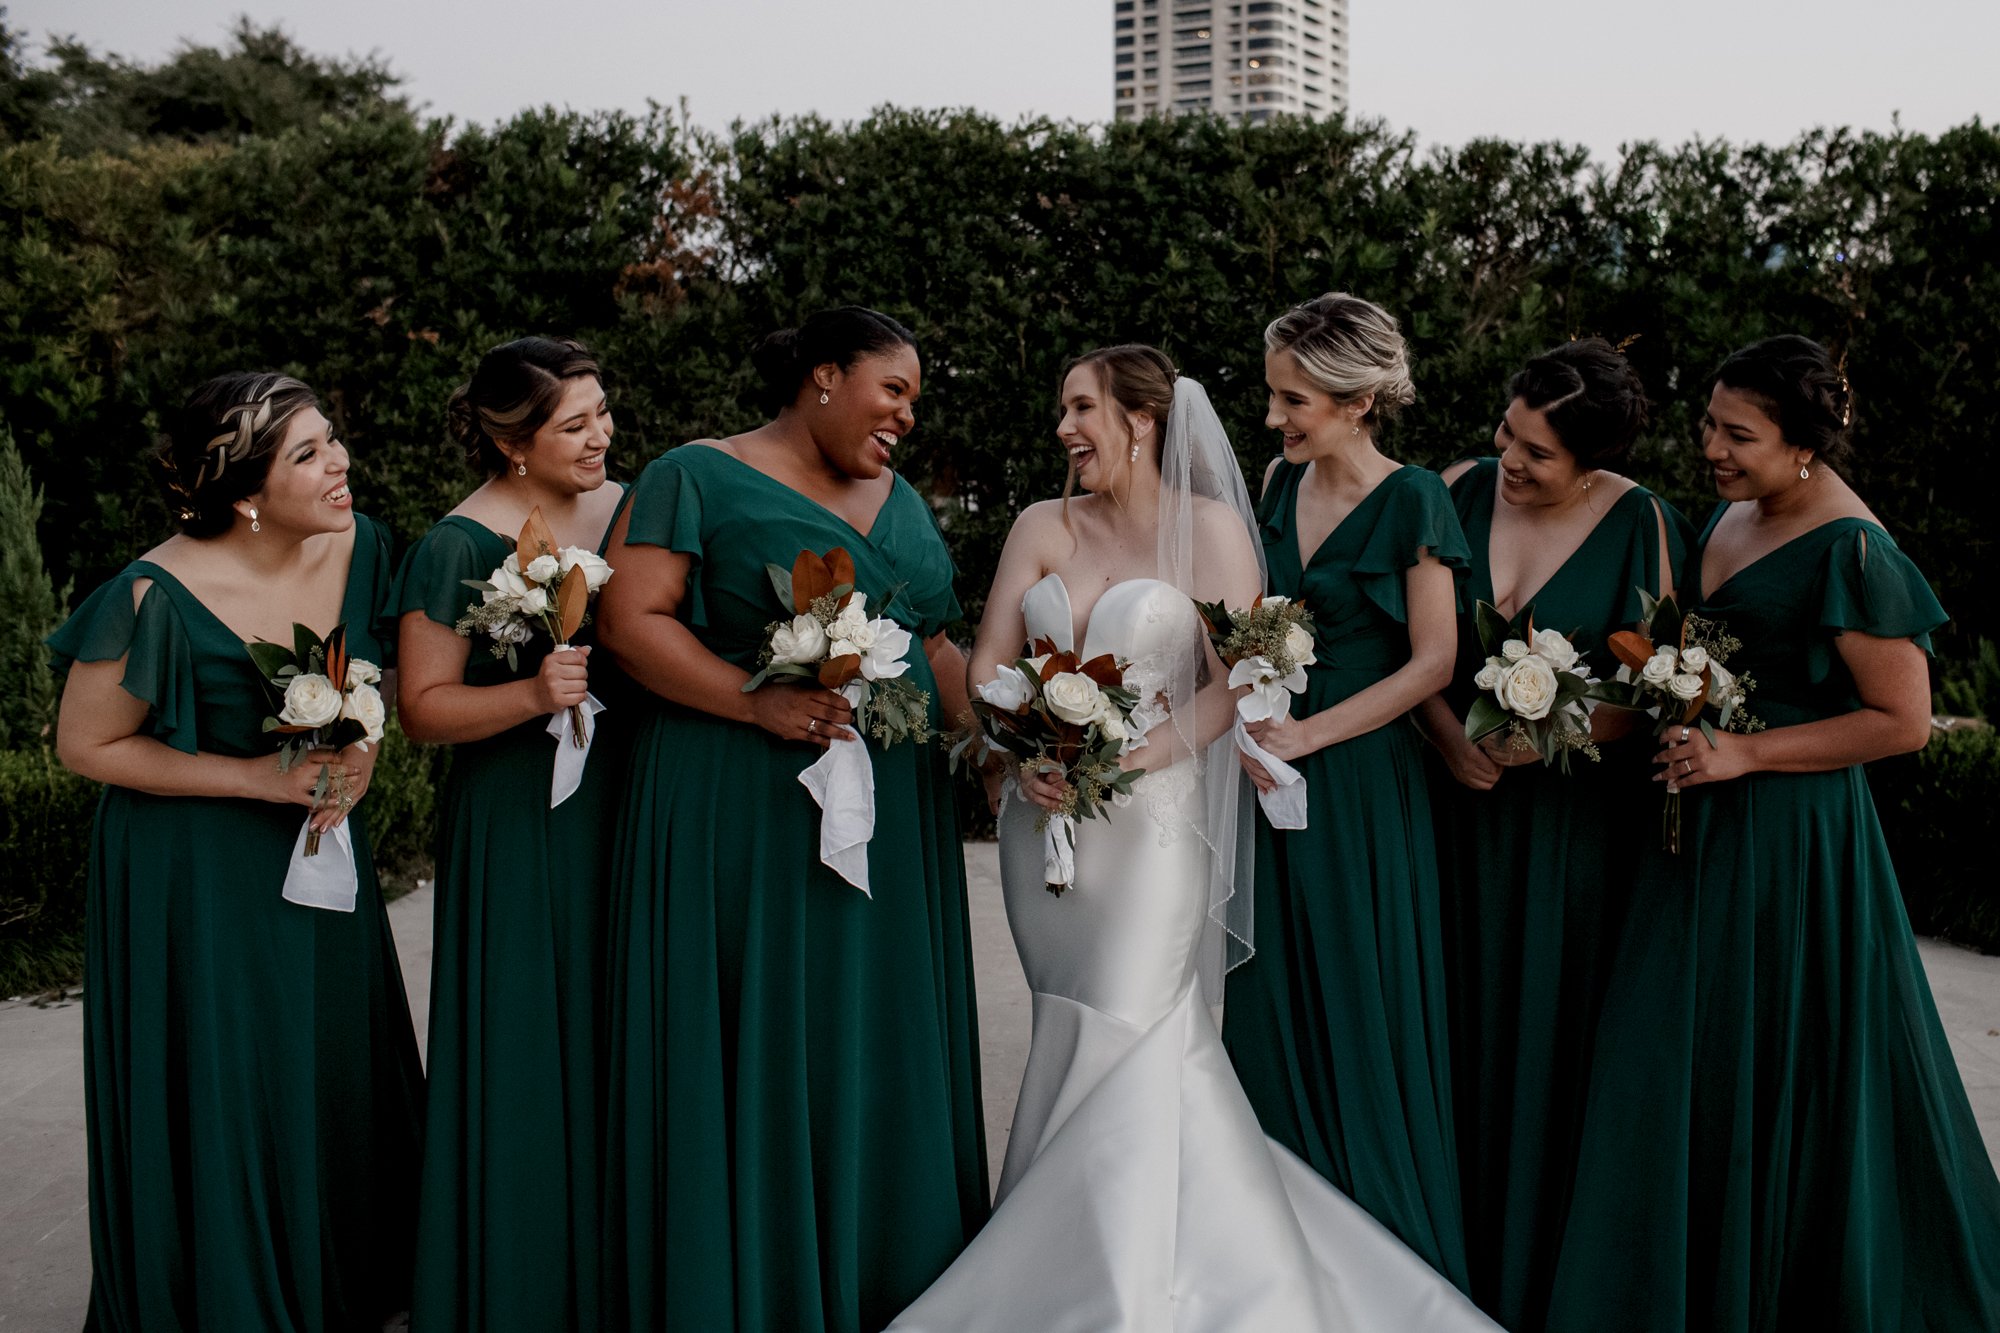 Bride and bridesmaids looking at each other smiling. New Orleans Style Wedding at McGovern Centennial Gardens